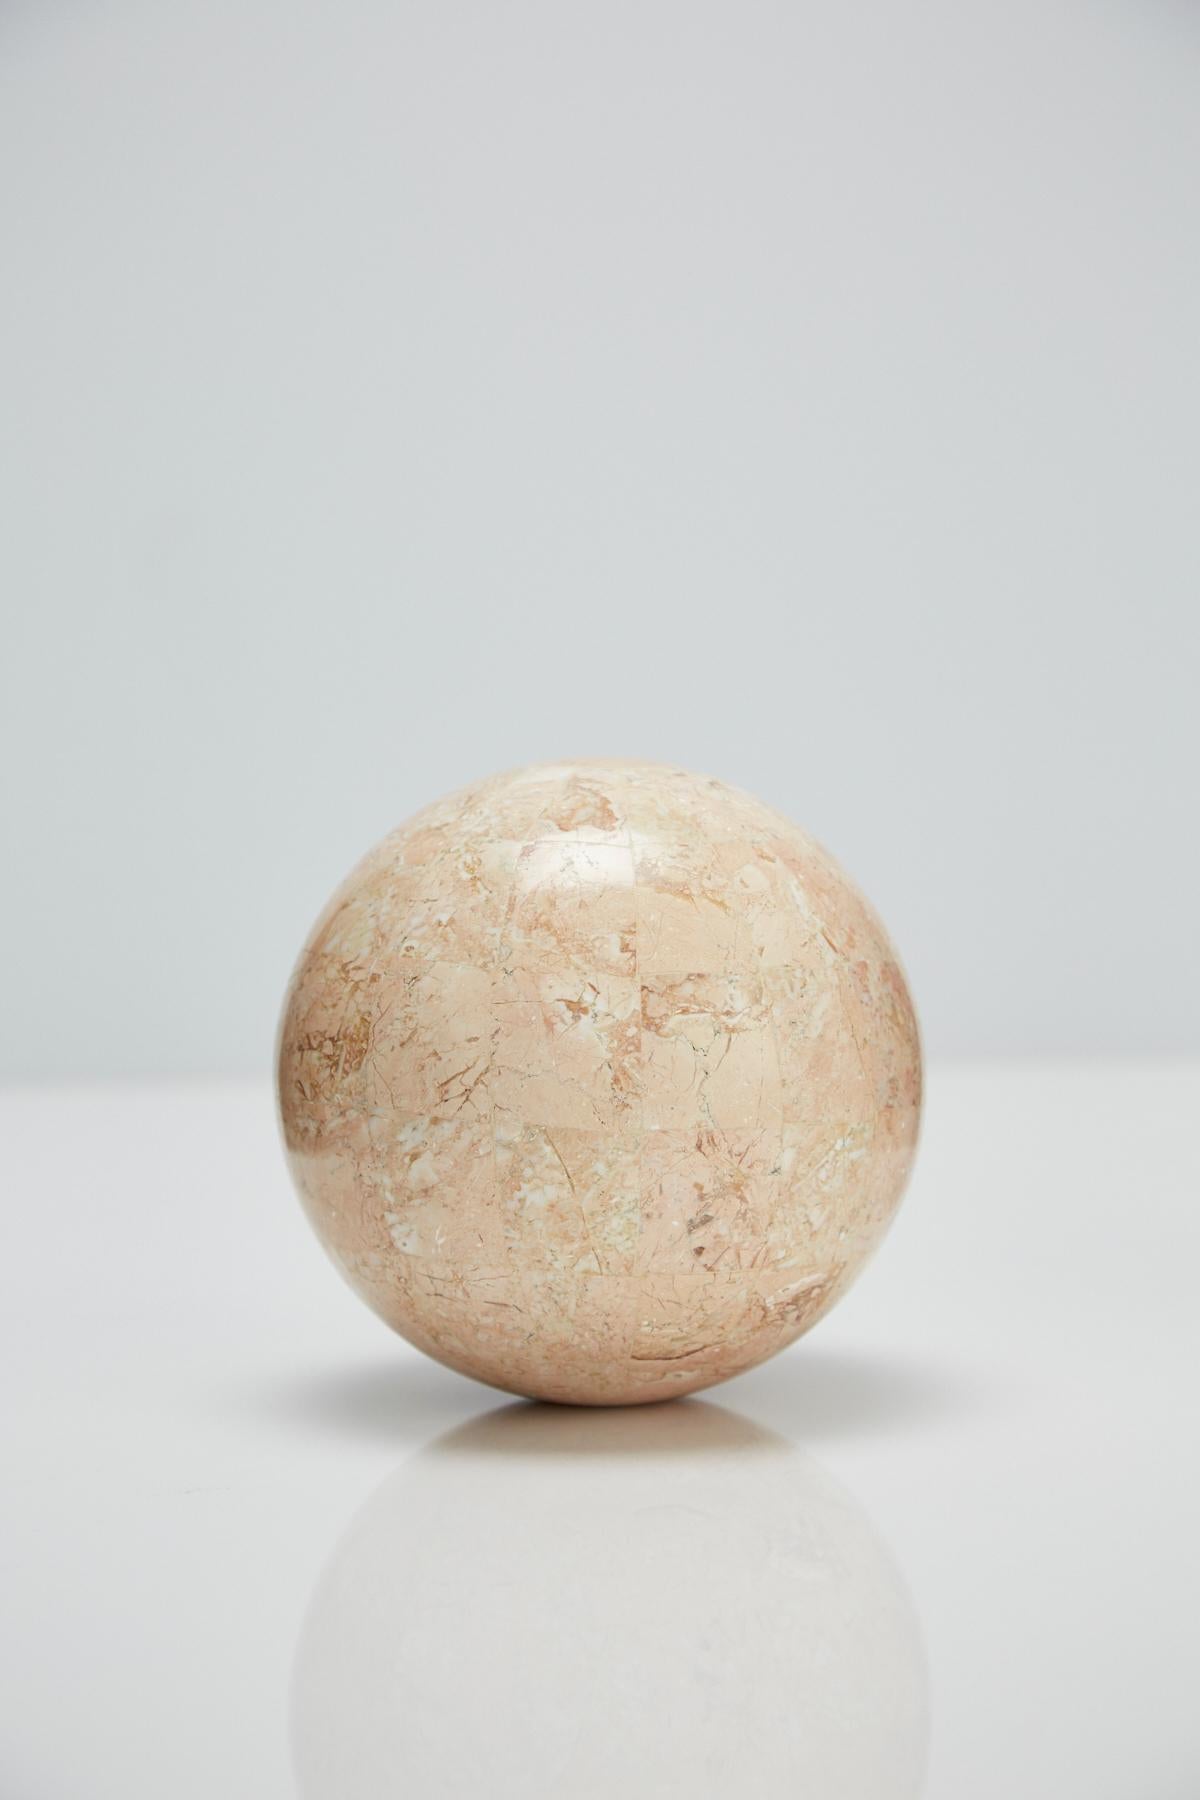 Postmodern tessellated stone sphere executed in peach stone over a fiberglass body. Measures: 5.5 in. diameter

Pair available.

All furnishings are made from 100% natural Fossil Stone or Seashell inlay, carefully hand cut and crafted piece-by-piece